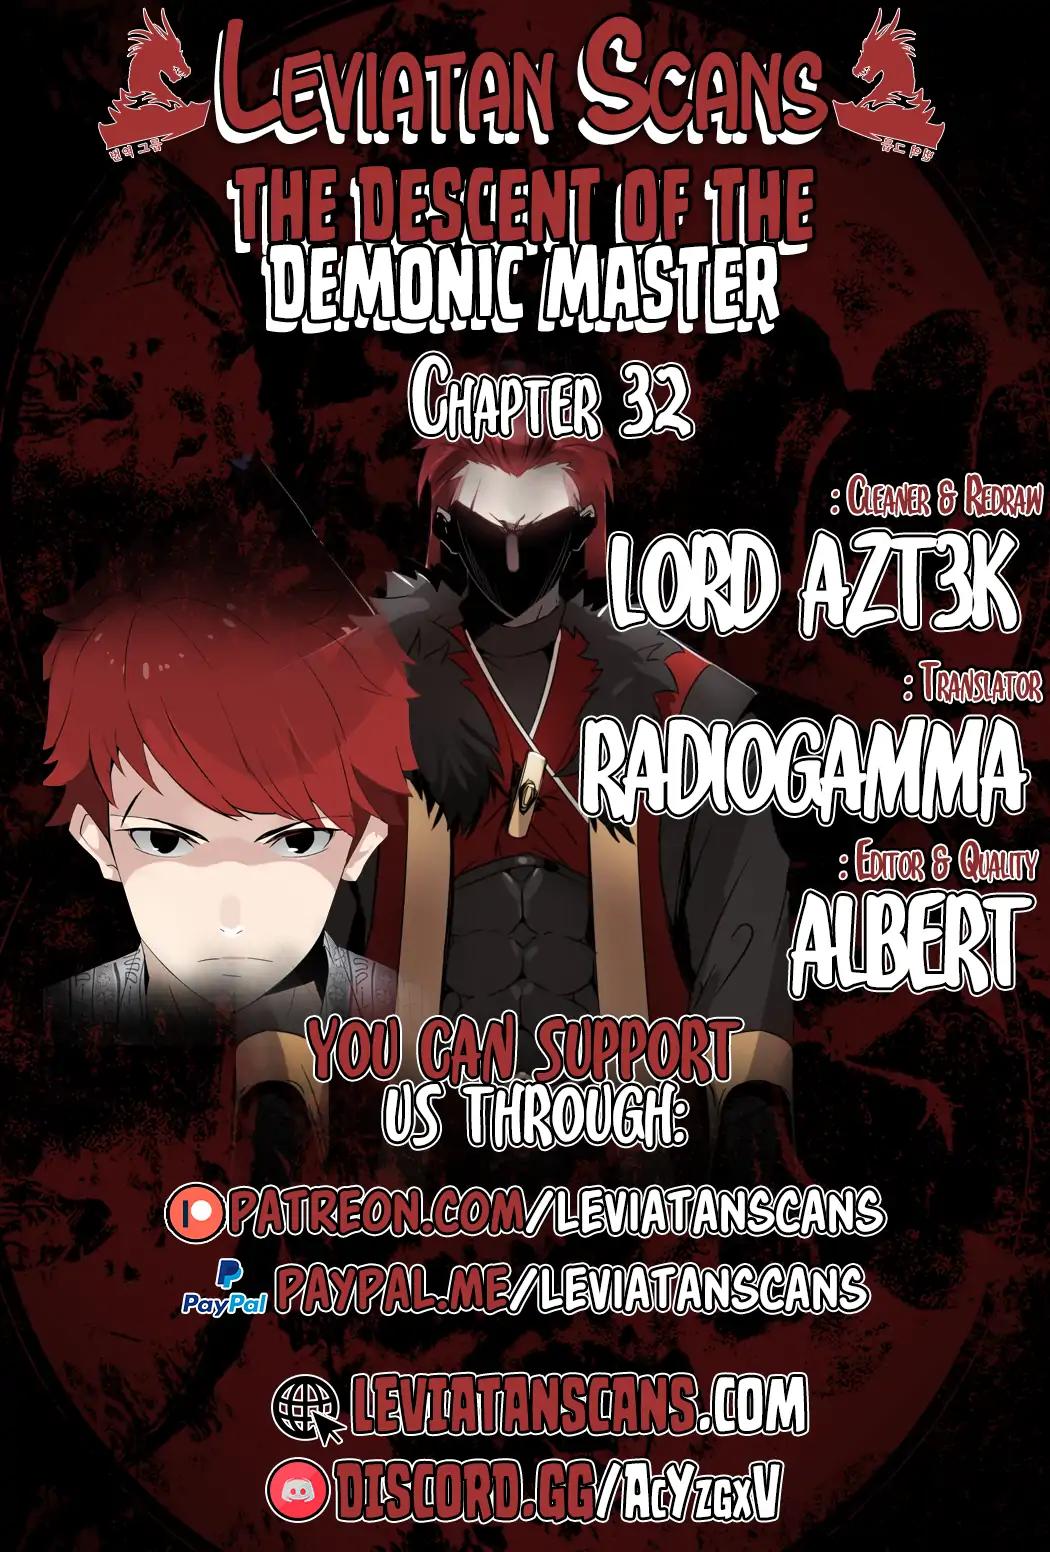 The Descent of the Demonic Master Chapter 32